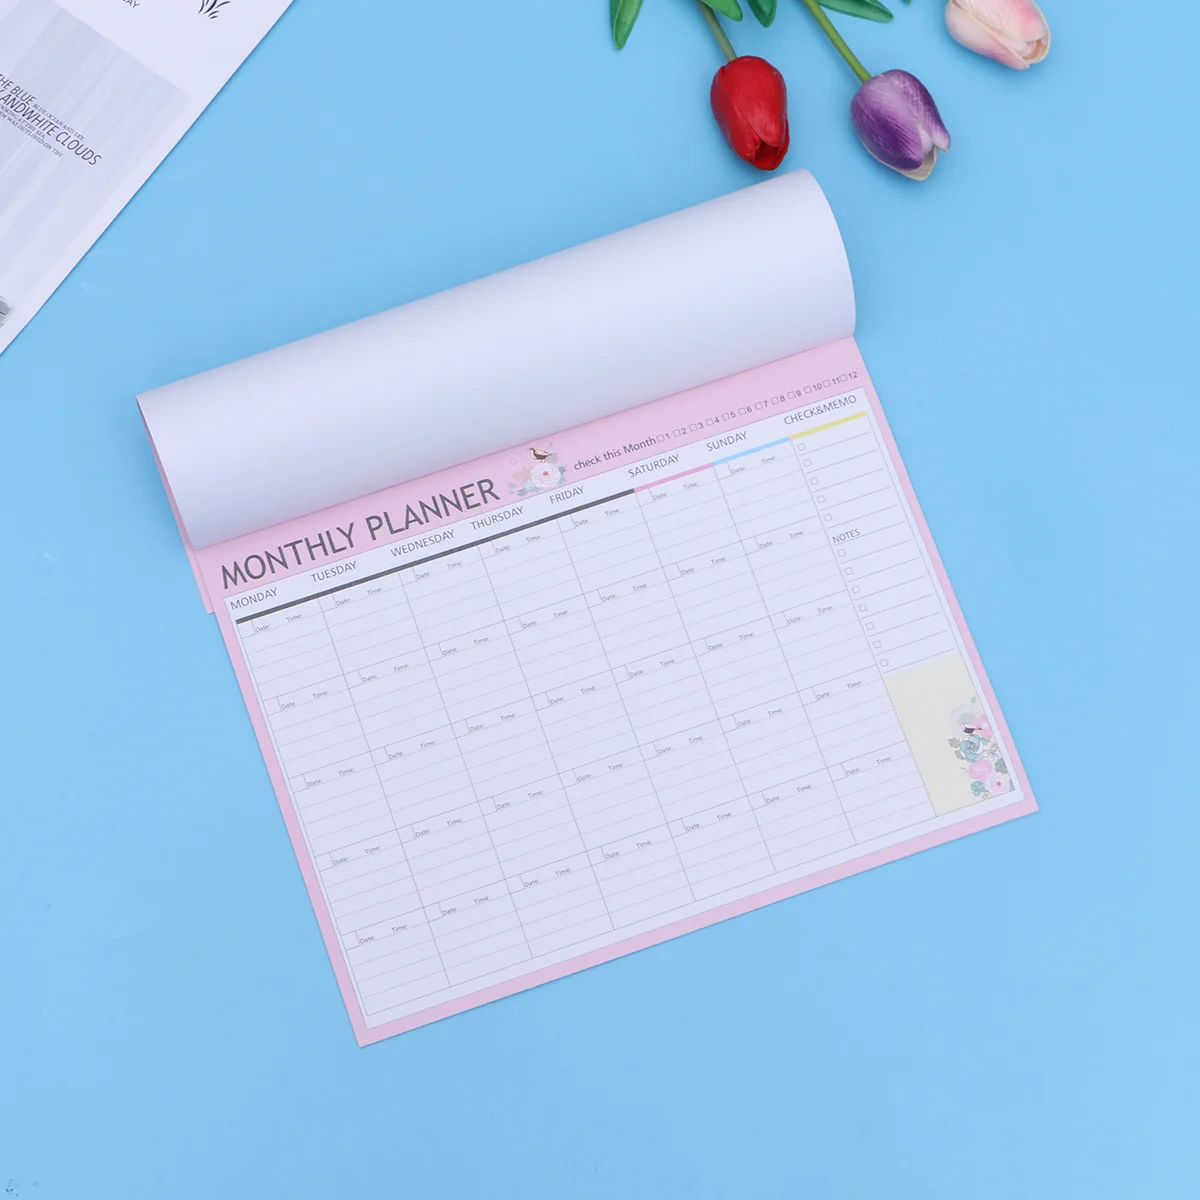 

Monthly Planner A4 Decorative Organizer Calendar Schedule Notebook Candy Weekly Daily Planner Memo Pad(Random Color)